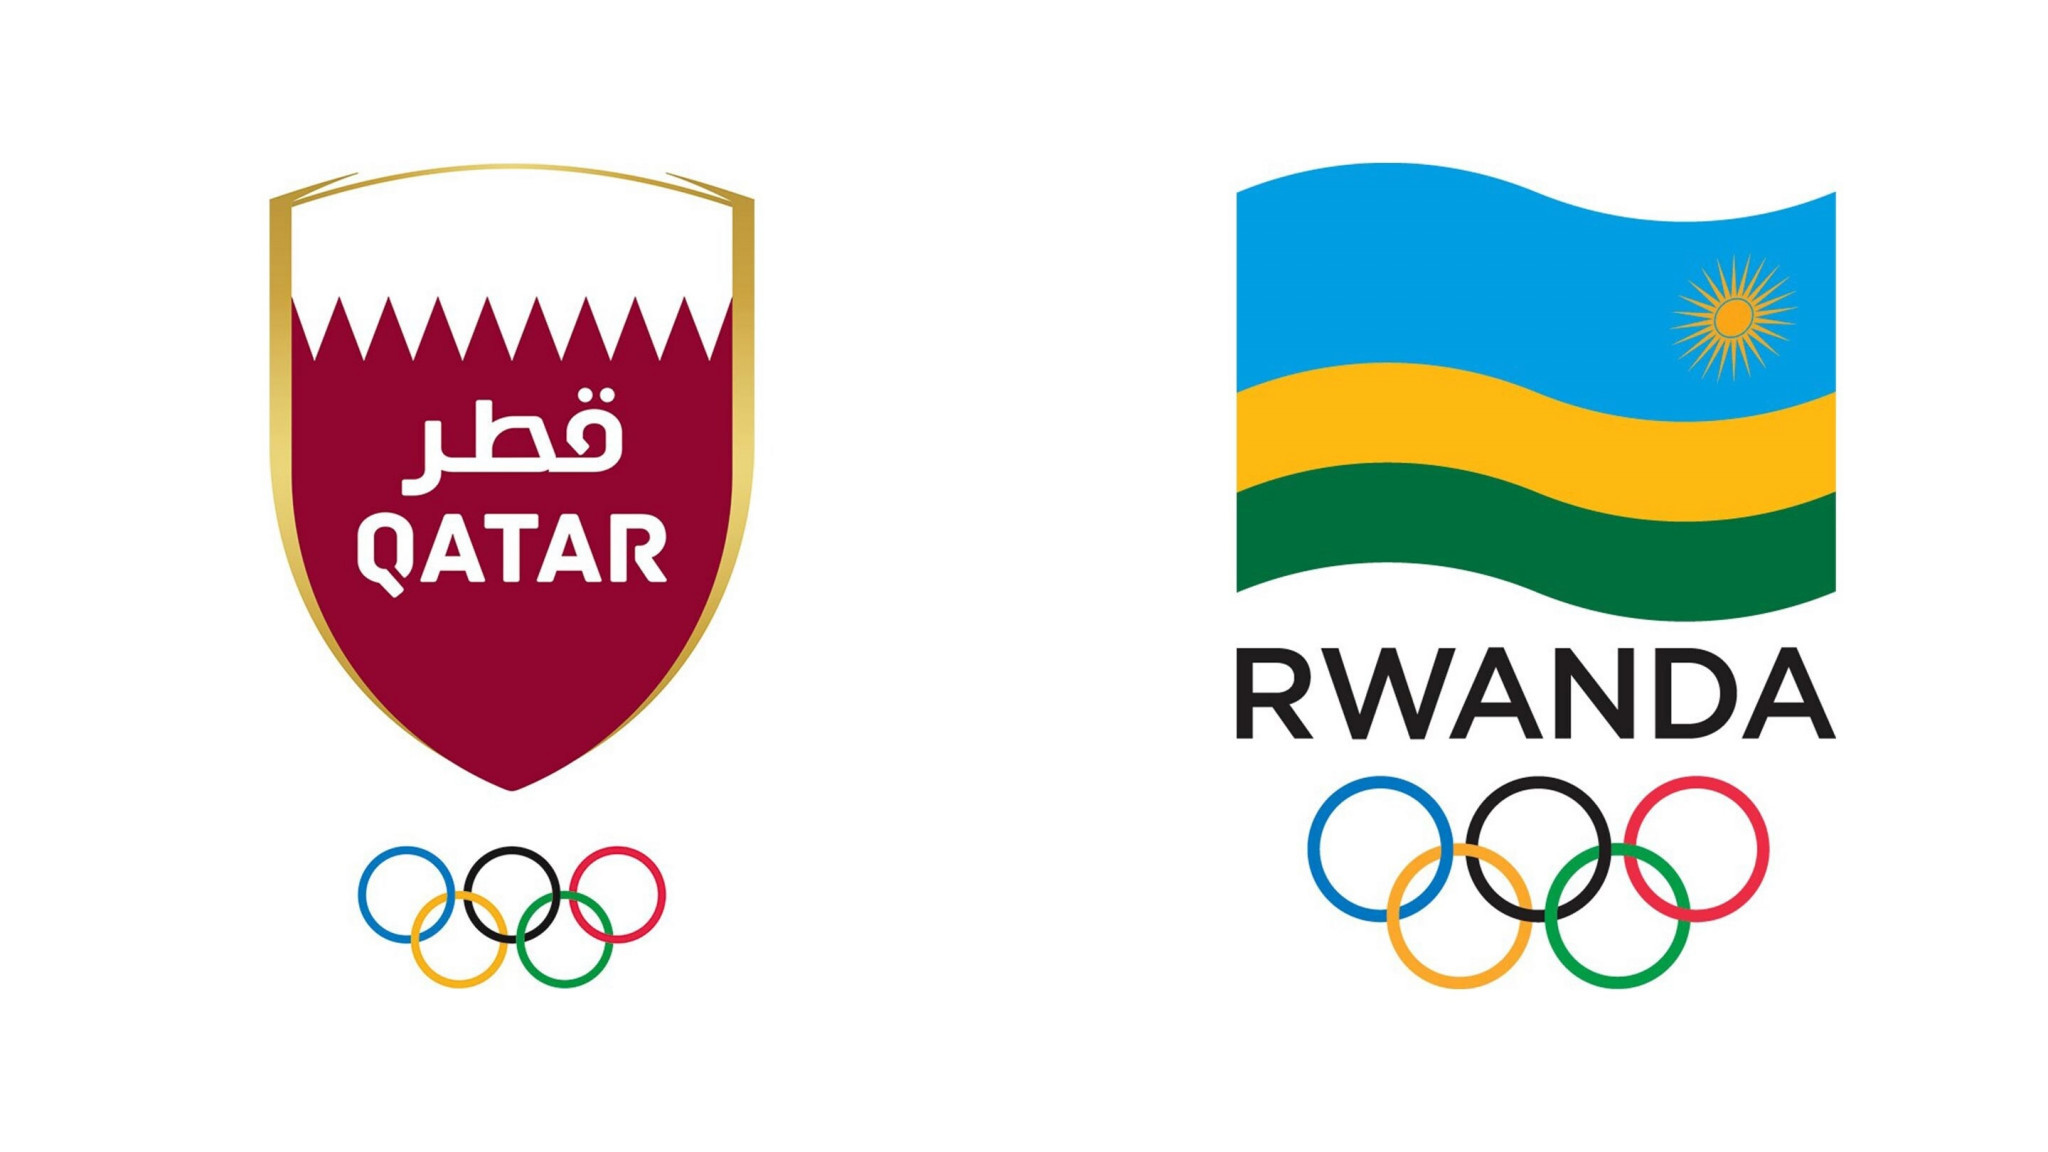 Qatar and Rwanda are home to vaccination hubs as part of the IOC's efforts to help inoculate Tokyo-bound participants ©IOC